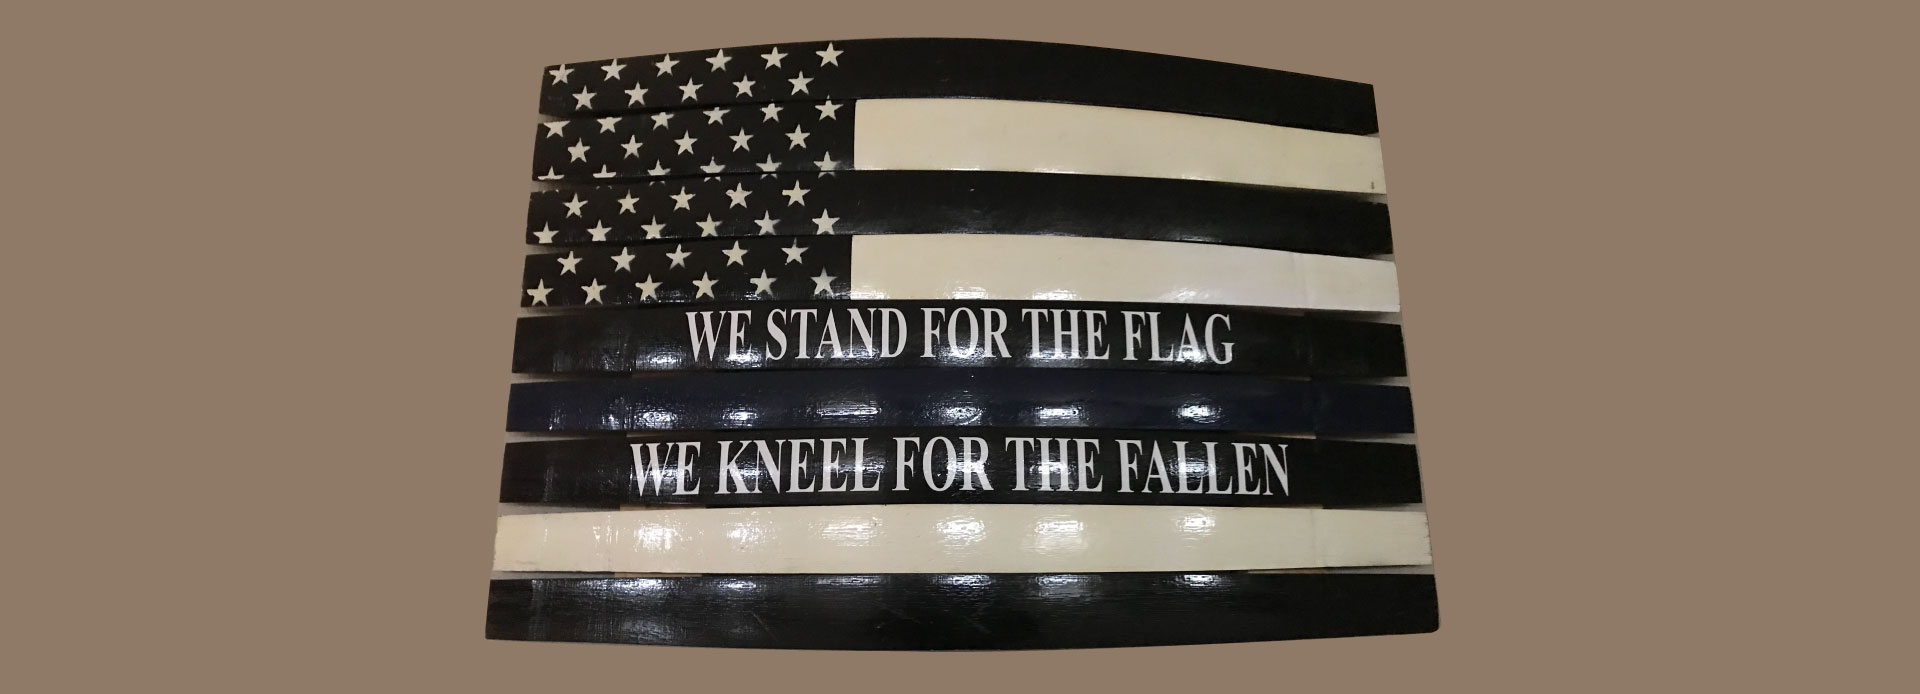 We stand for the flag, we kneel for the fallen